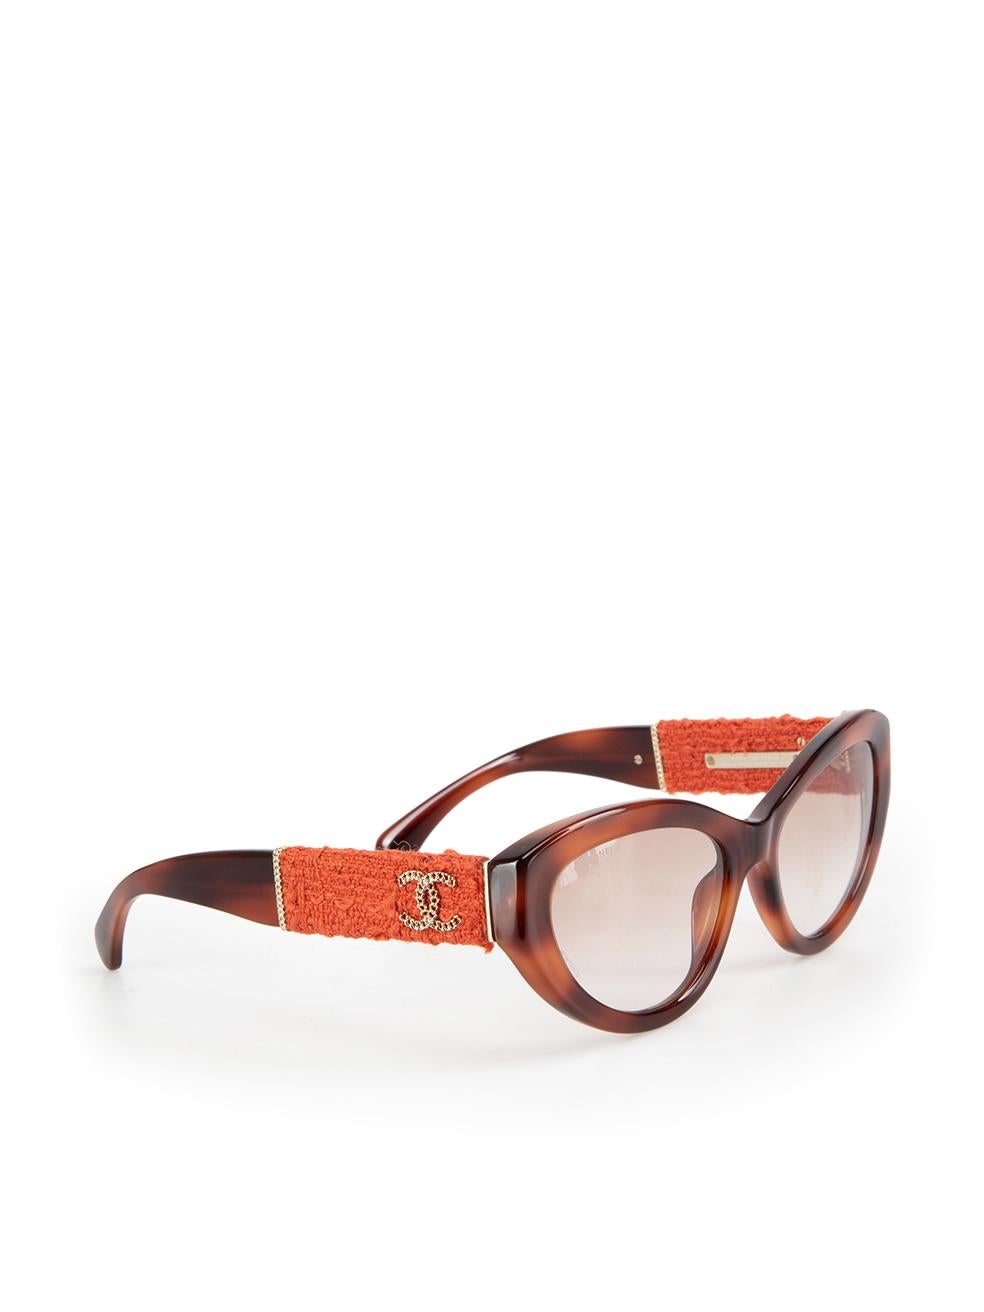 Chanel Havana Brown Tortoiseshell Cat Eye Sunglasses In New Condition For Sale In London, GB